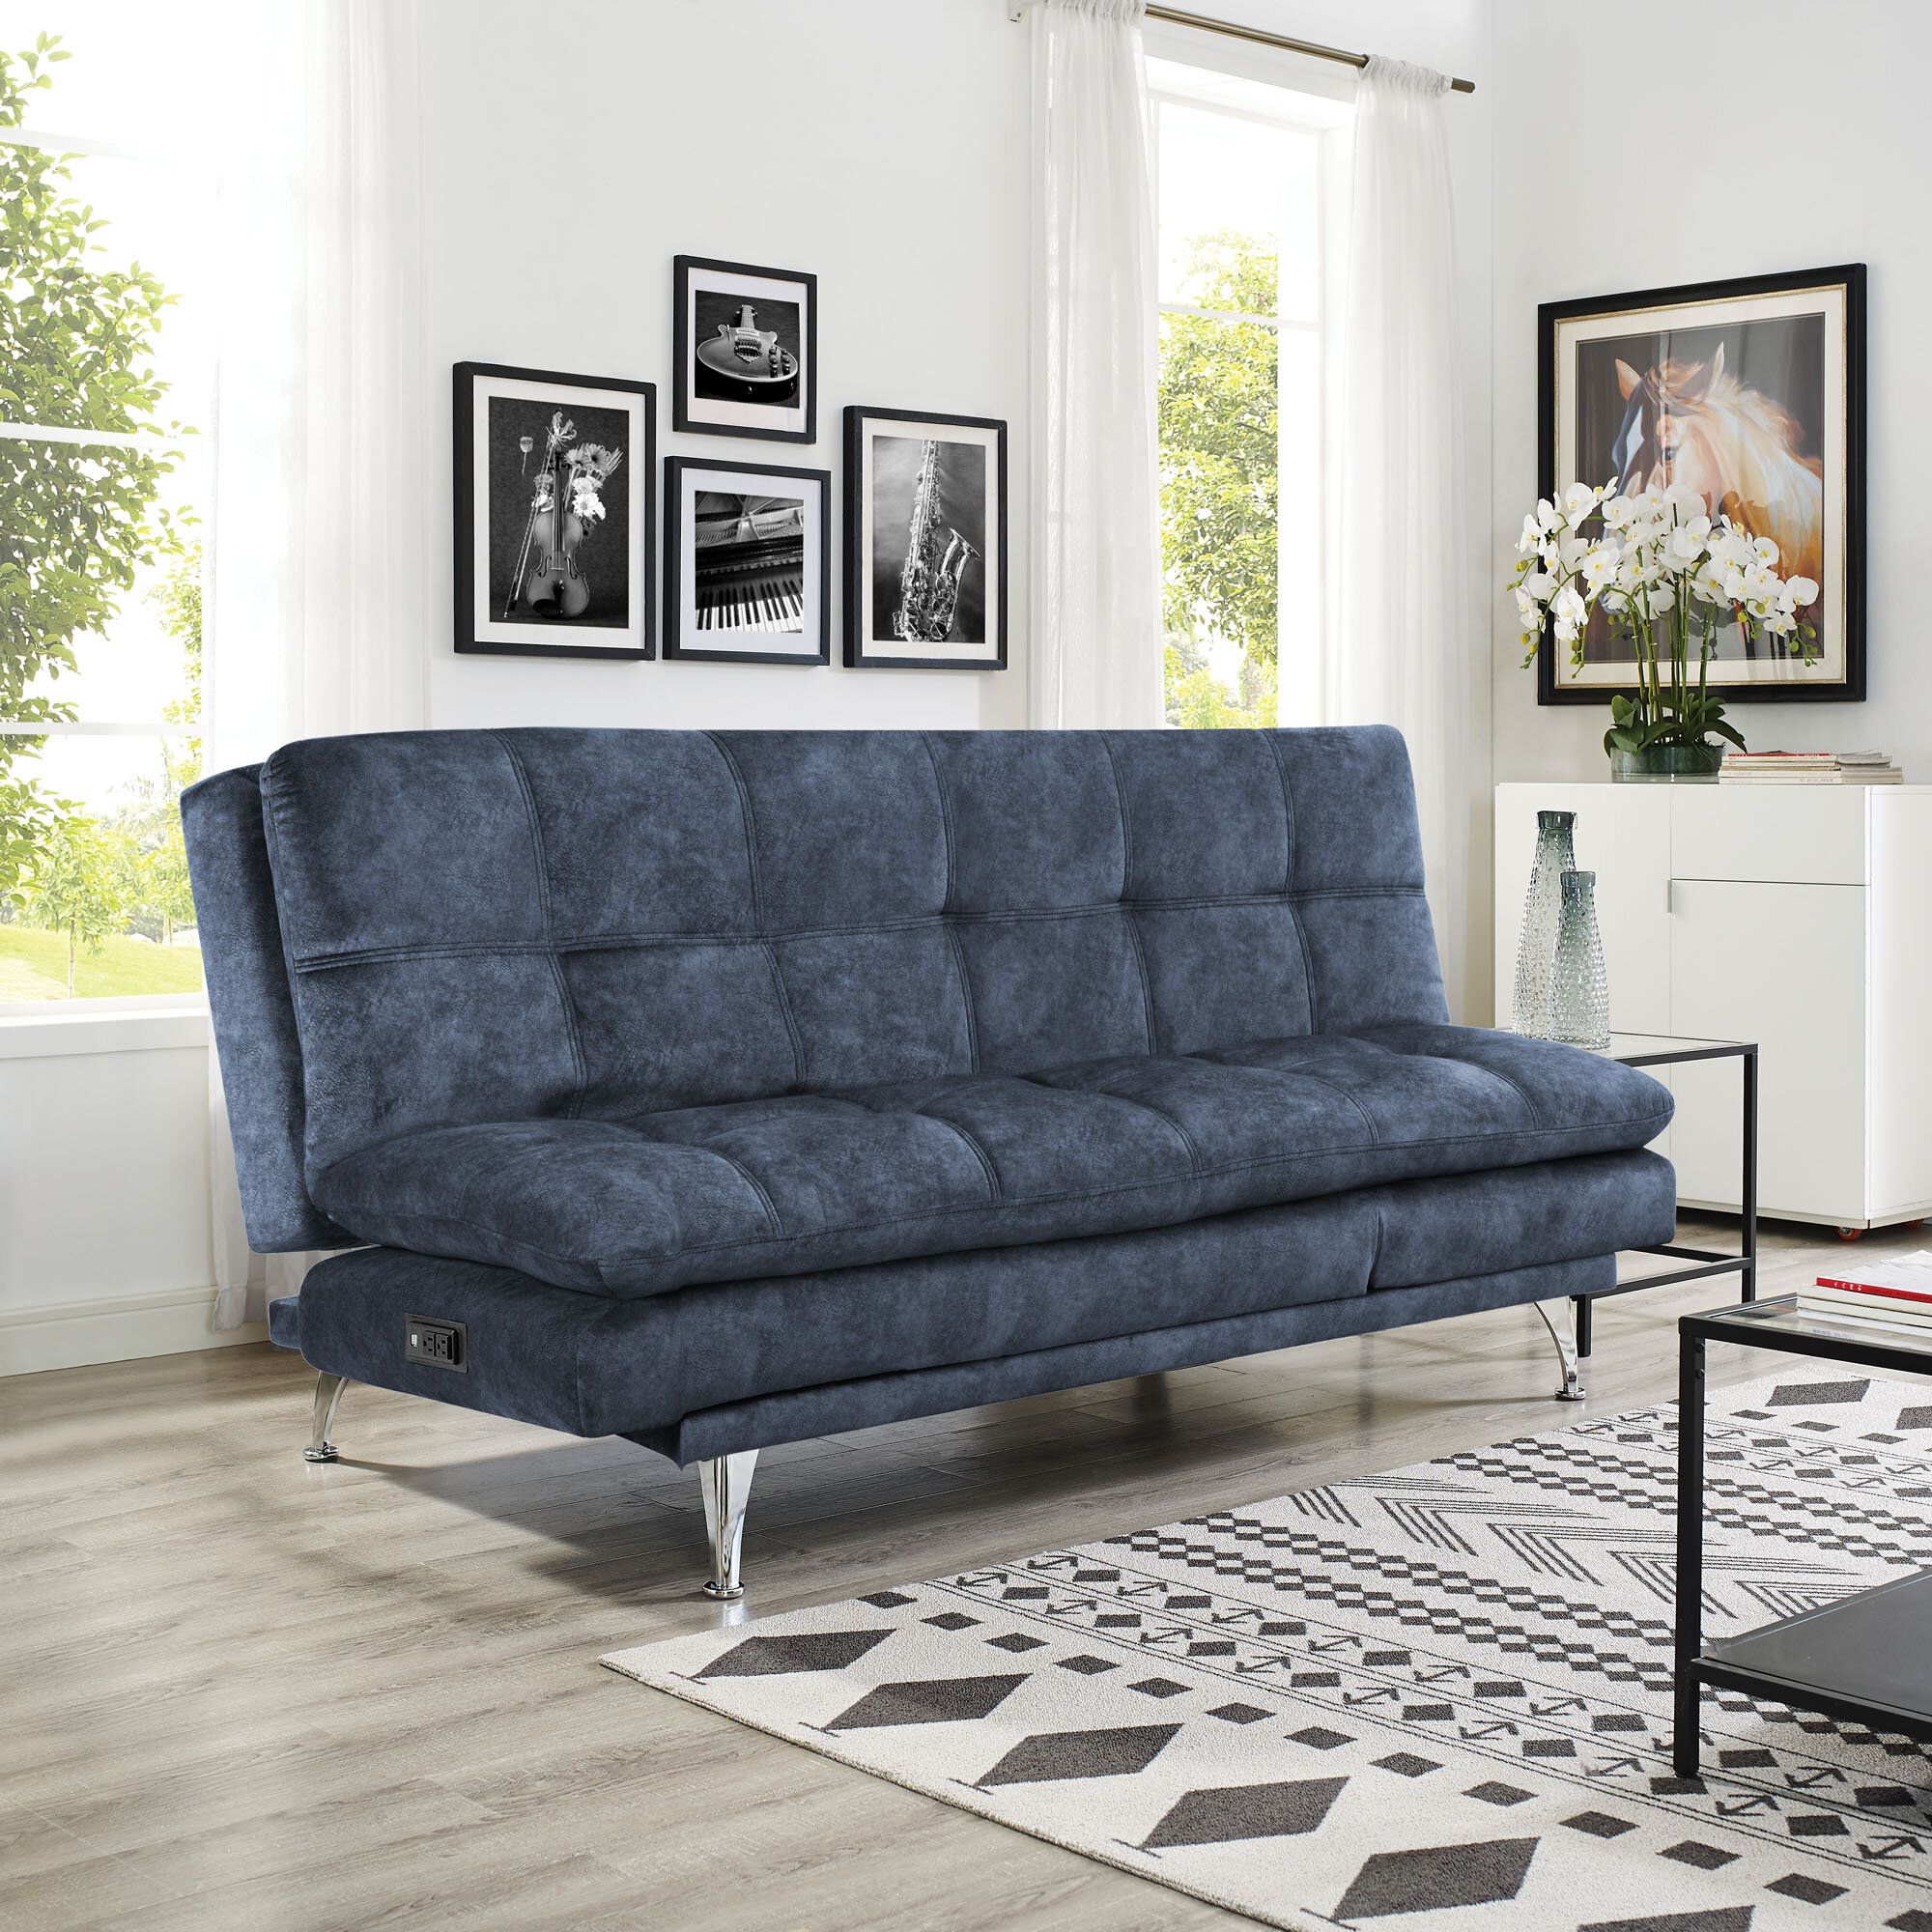 Featured Photo of The Best Tufted Convertible Sleeper Sofas